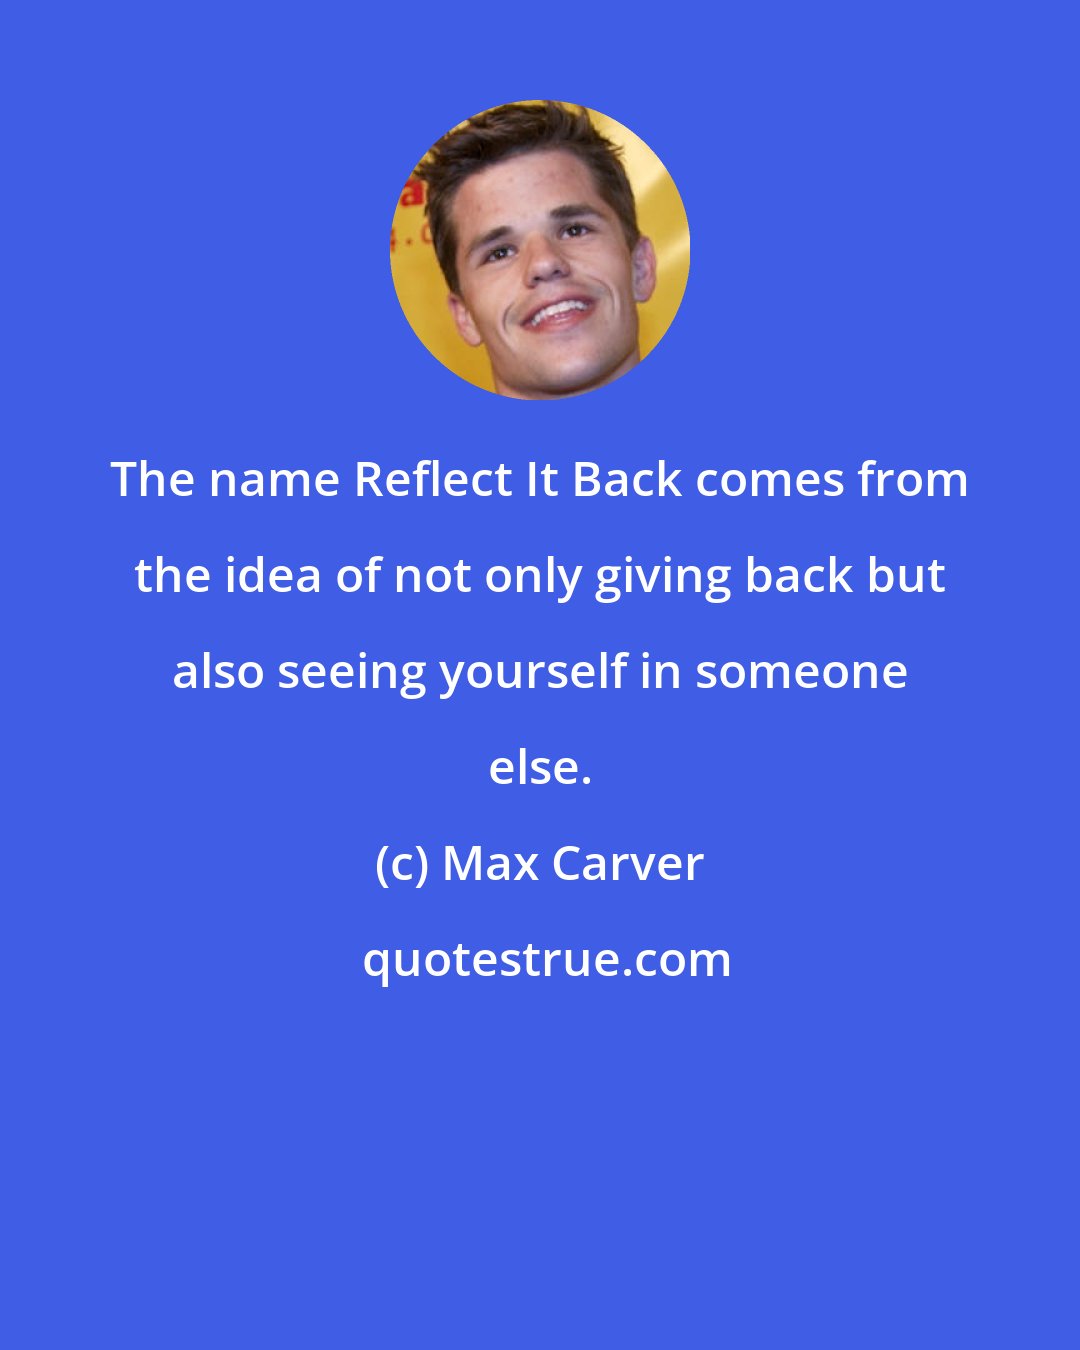 Max Carver: The name Reflect It Back comes from the idea of not only giving back but also seeing yourself in someone else.